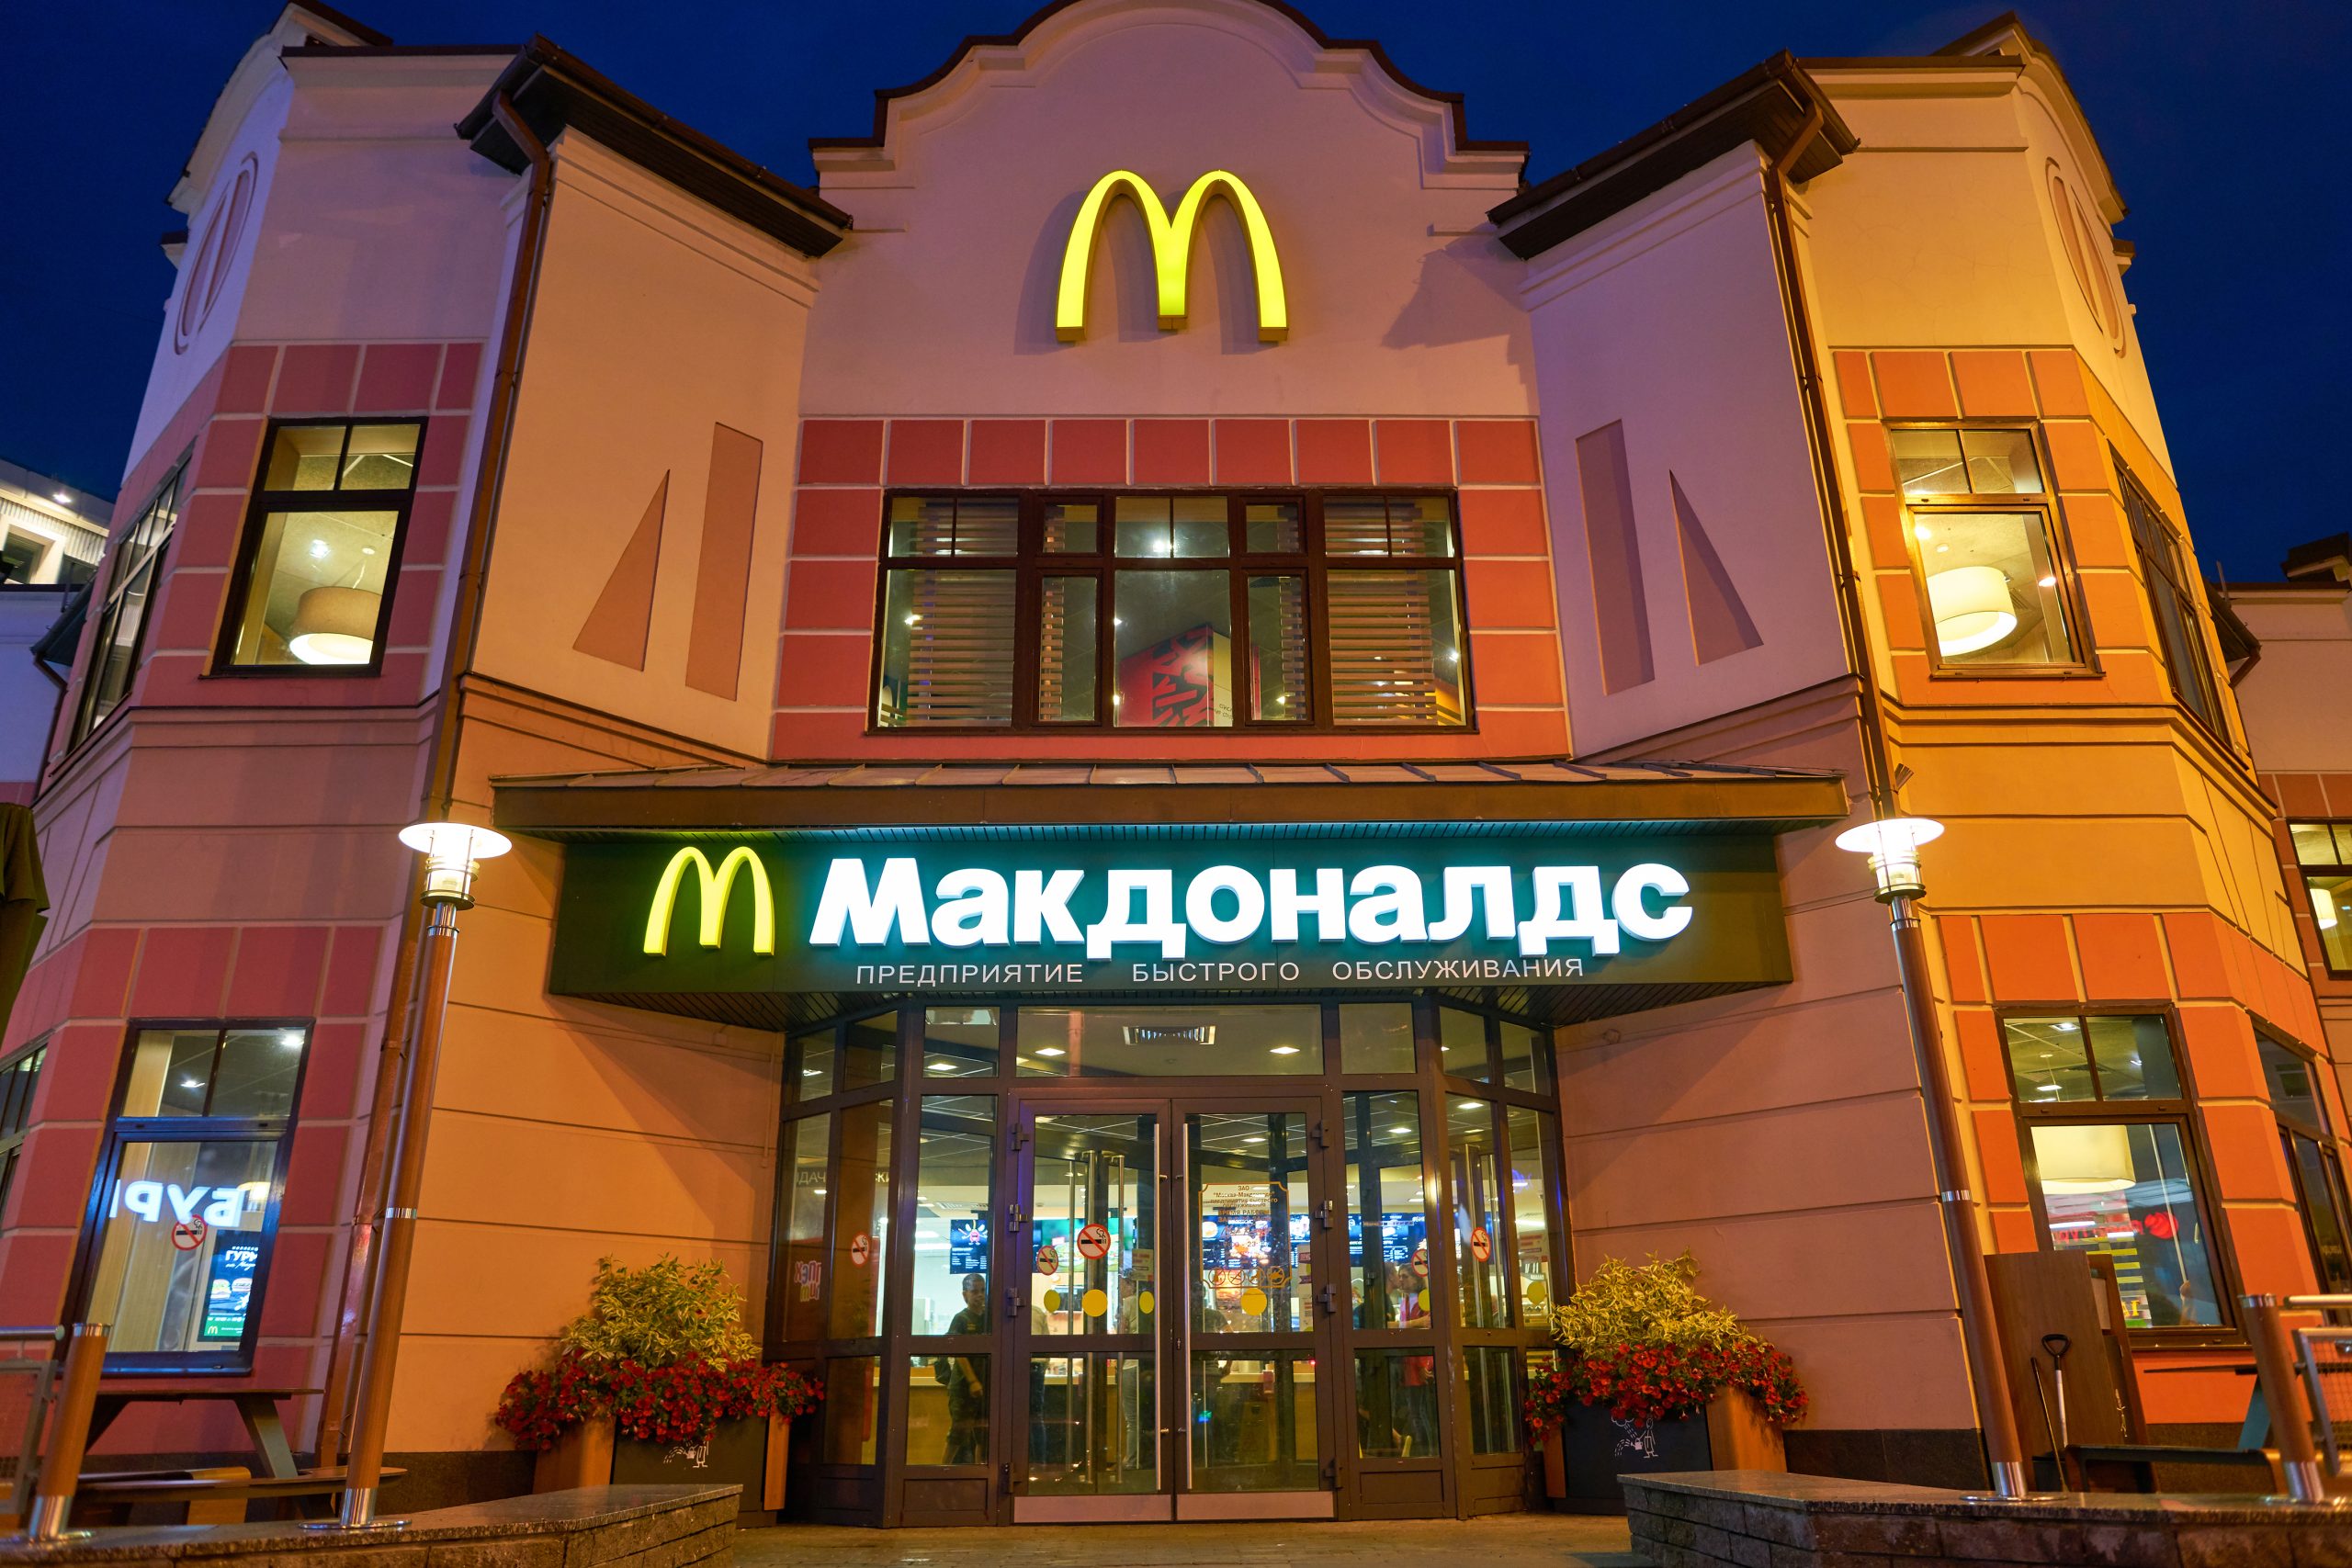 McDonald’s quitting Russia after three decades